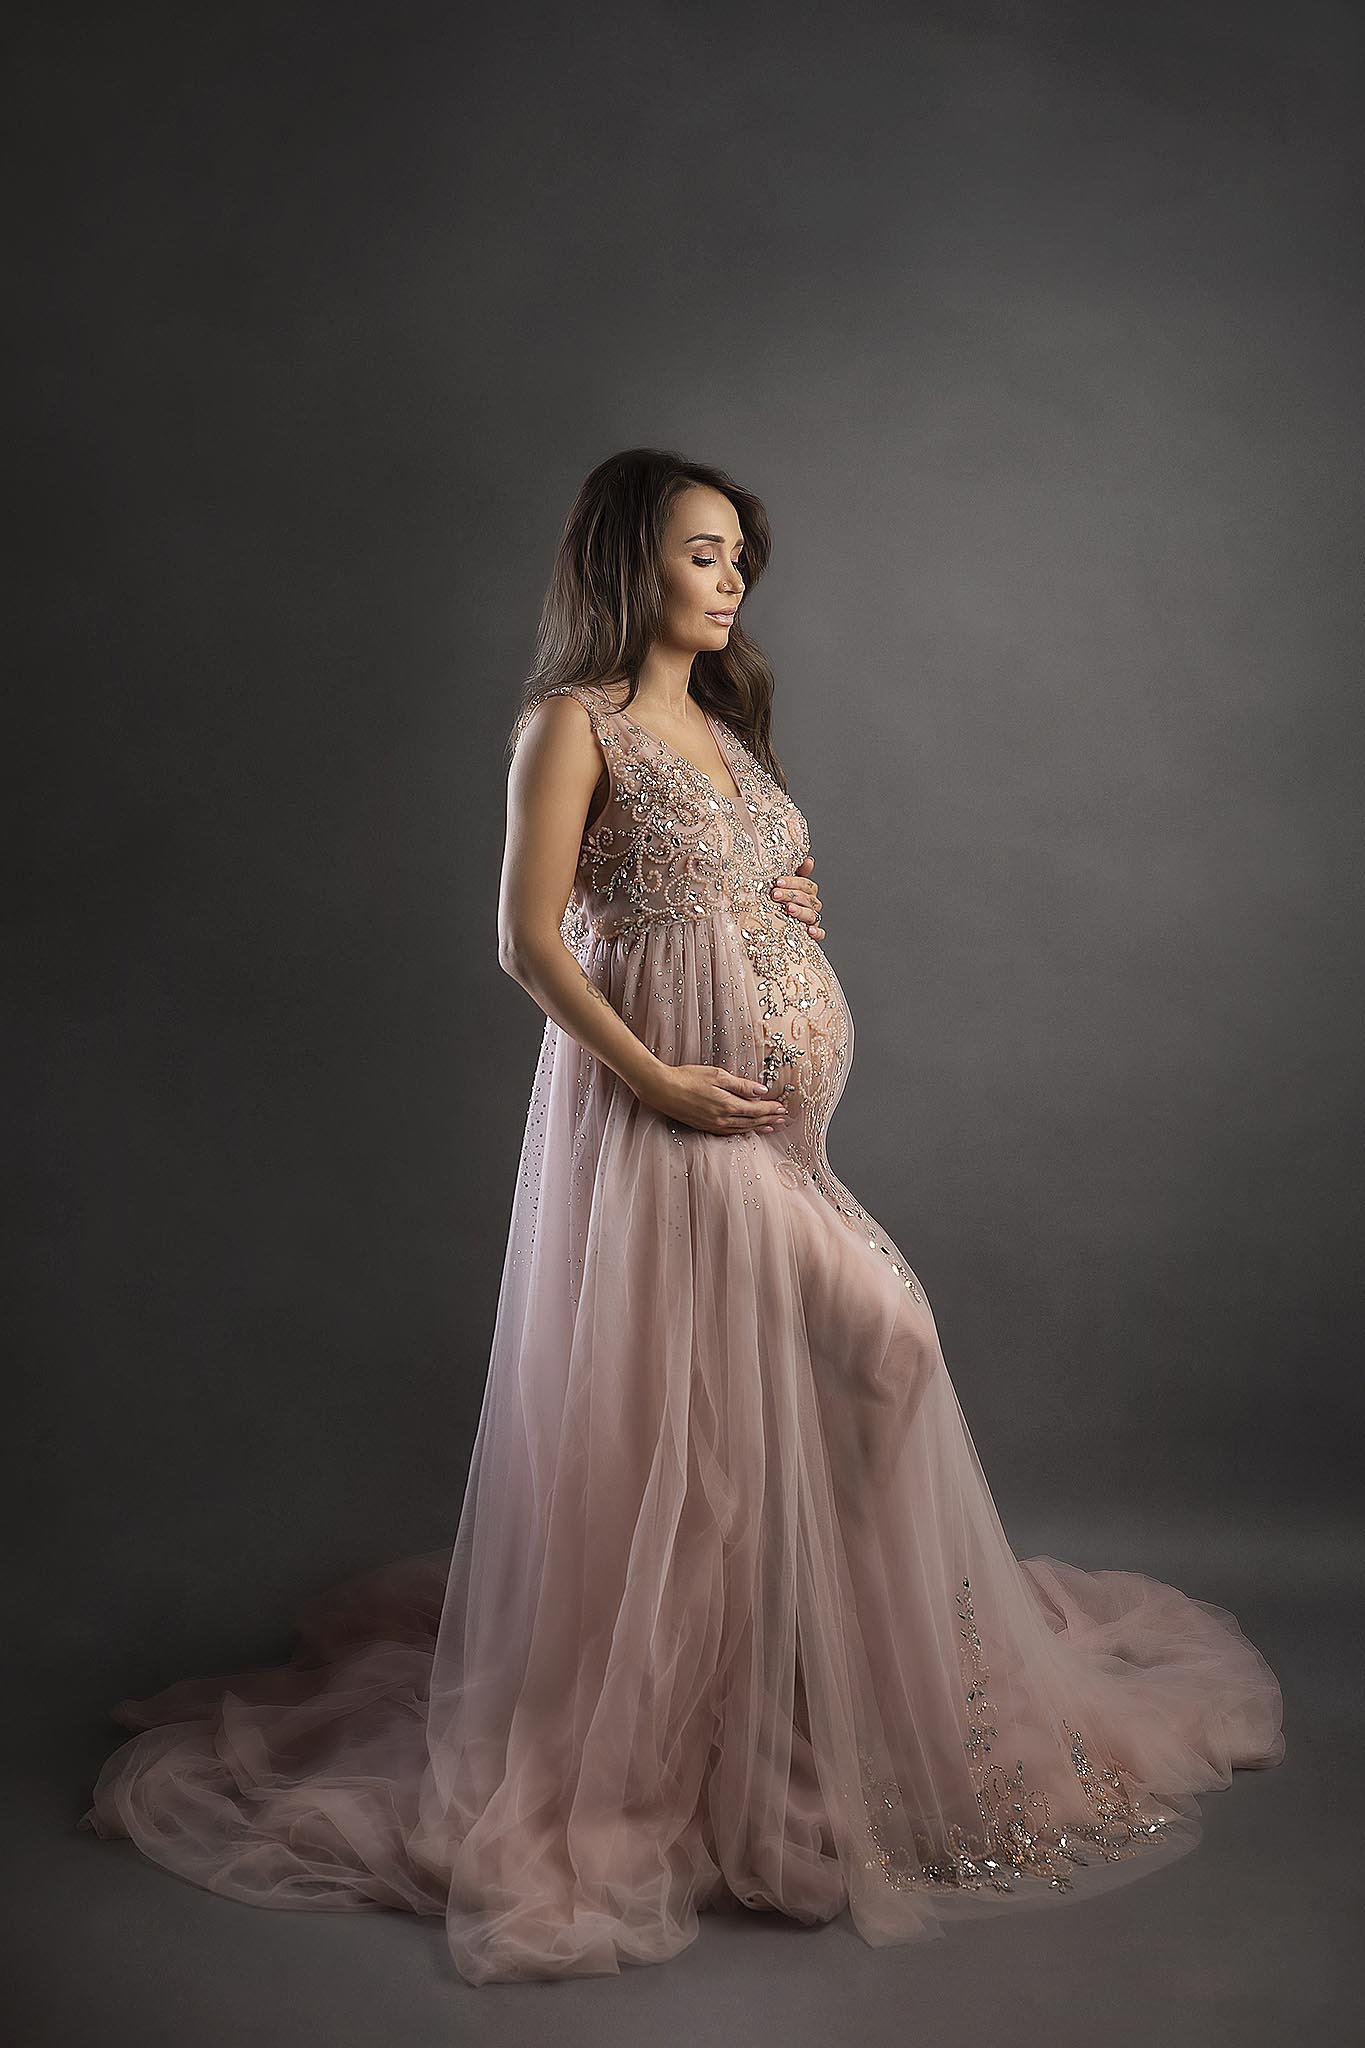 pregnancy photo taken by maternity photographer manchester